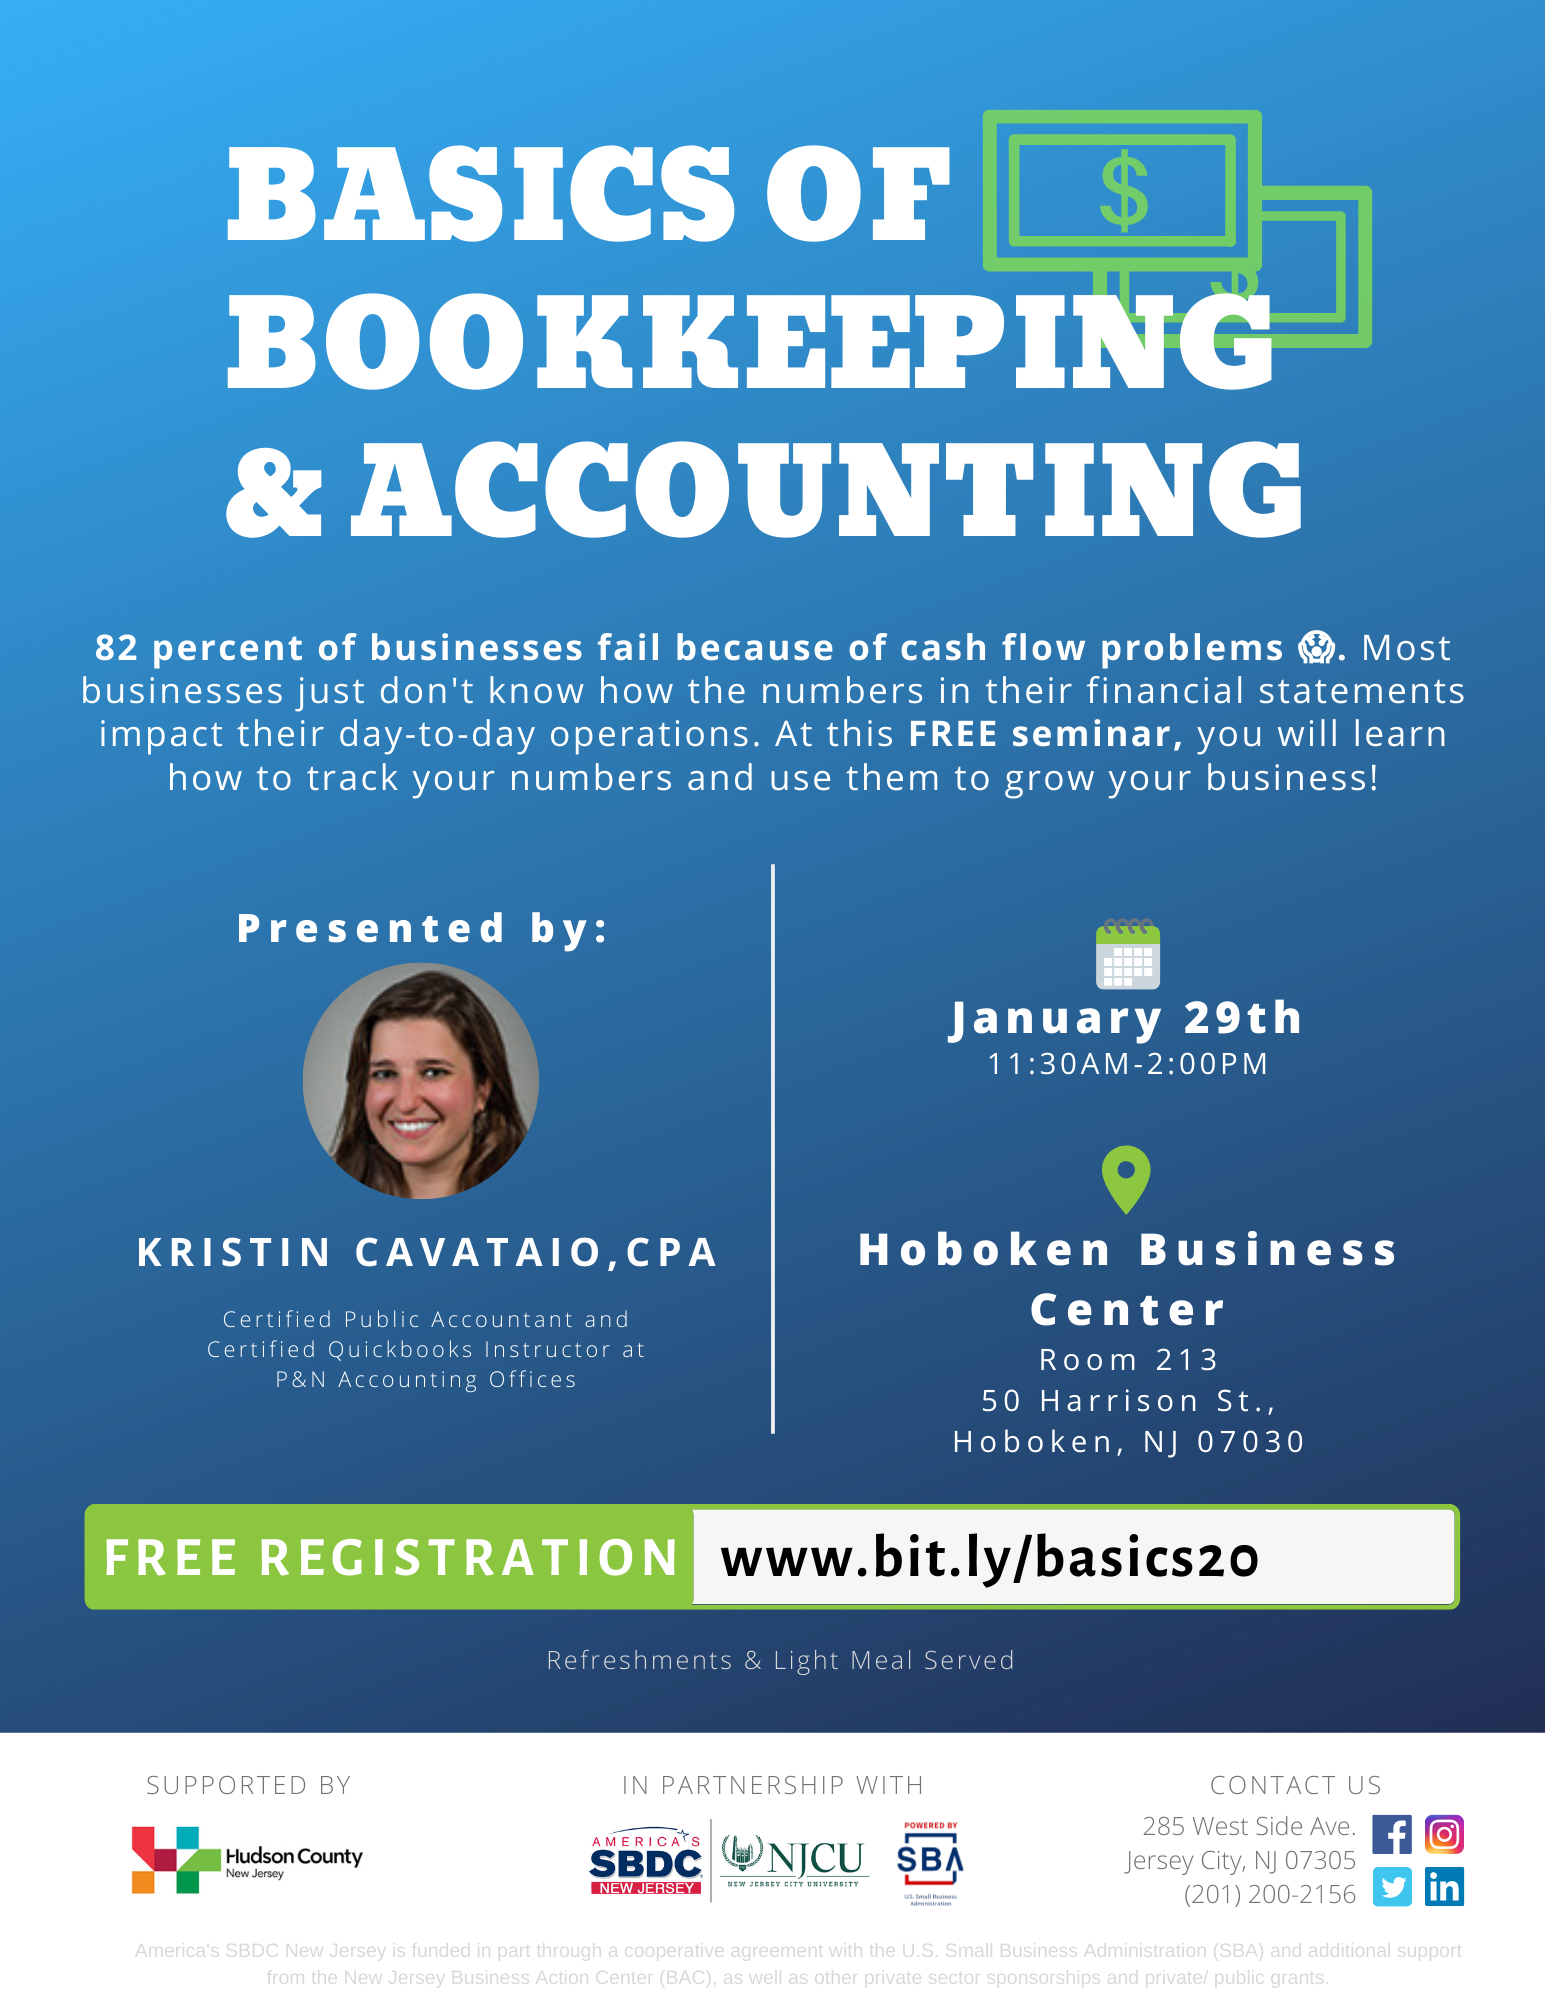 Introduction to Bookkeeping and Accounting